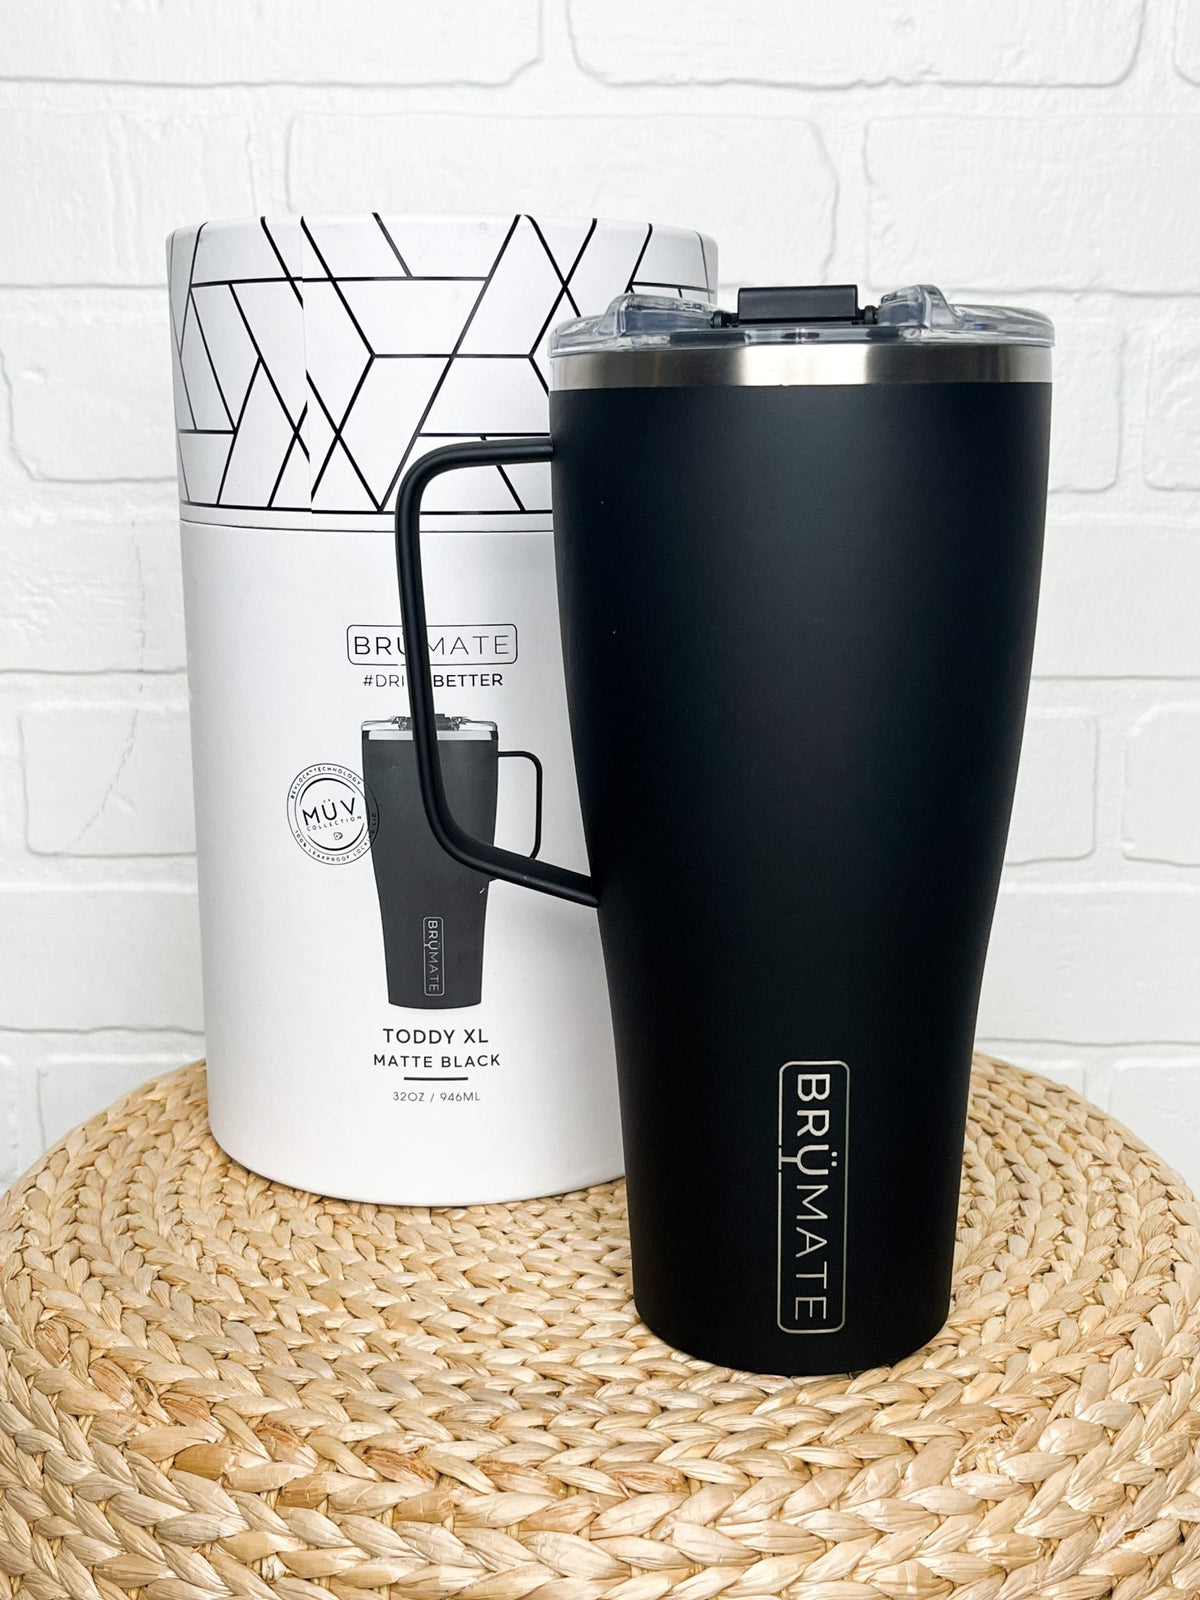 BruMate Toddy XL mug matte black - BruMate Drinkware, Tumblers and Insulated Can Coolers at Lush Fashion Lounge Trendy Boutique in Oklahoma City